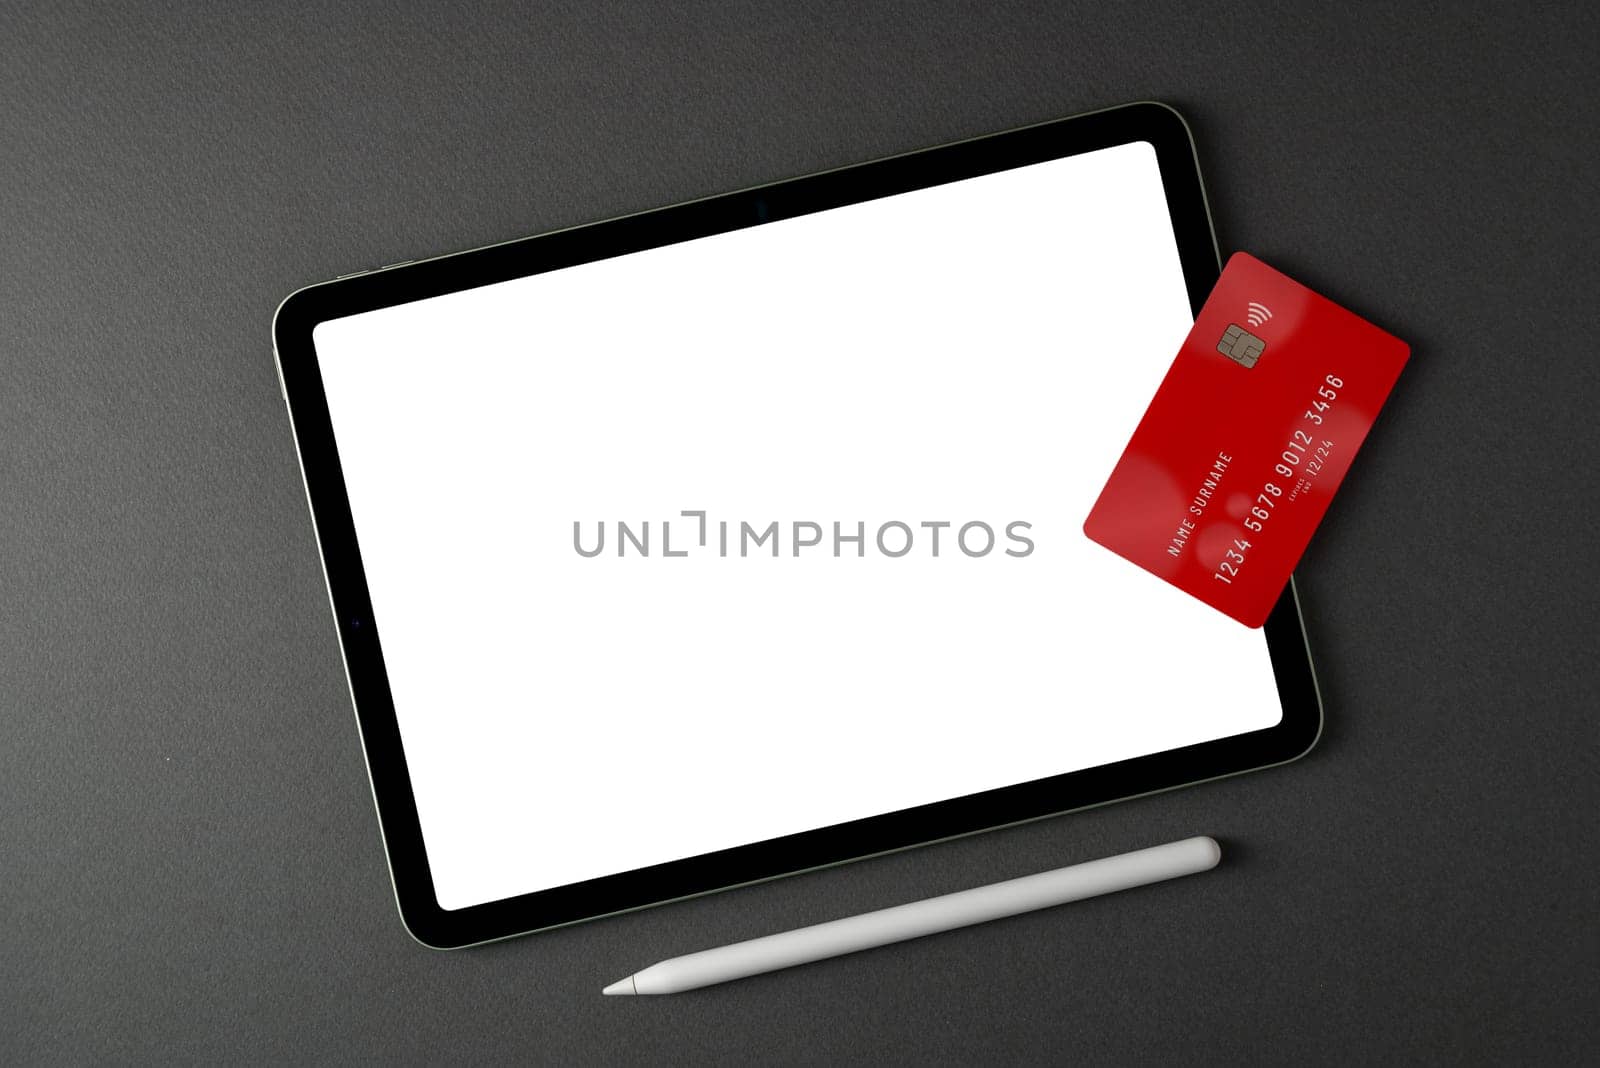 Credit card lying on tablet with blank screen on dark gray table